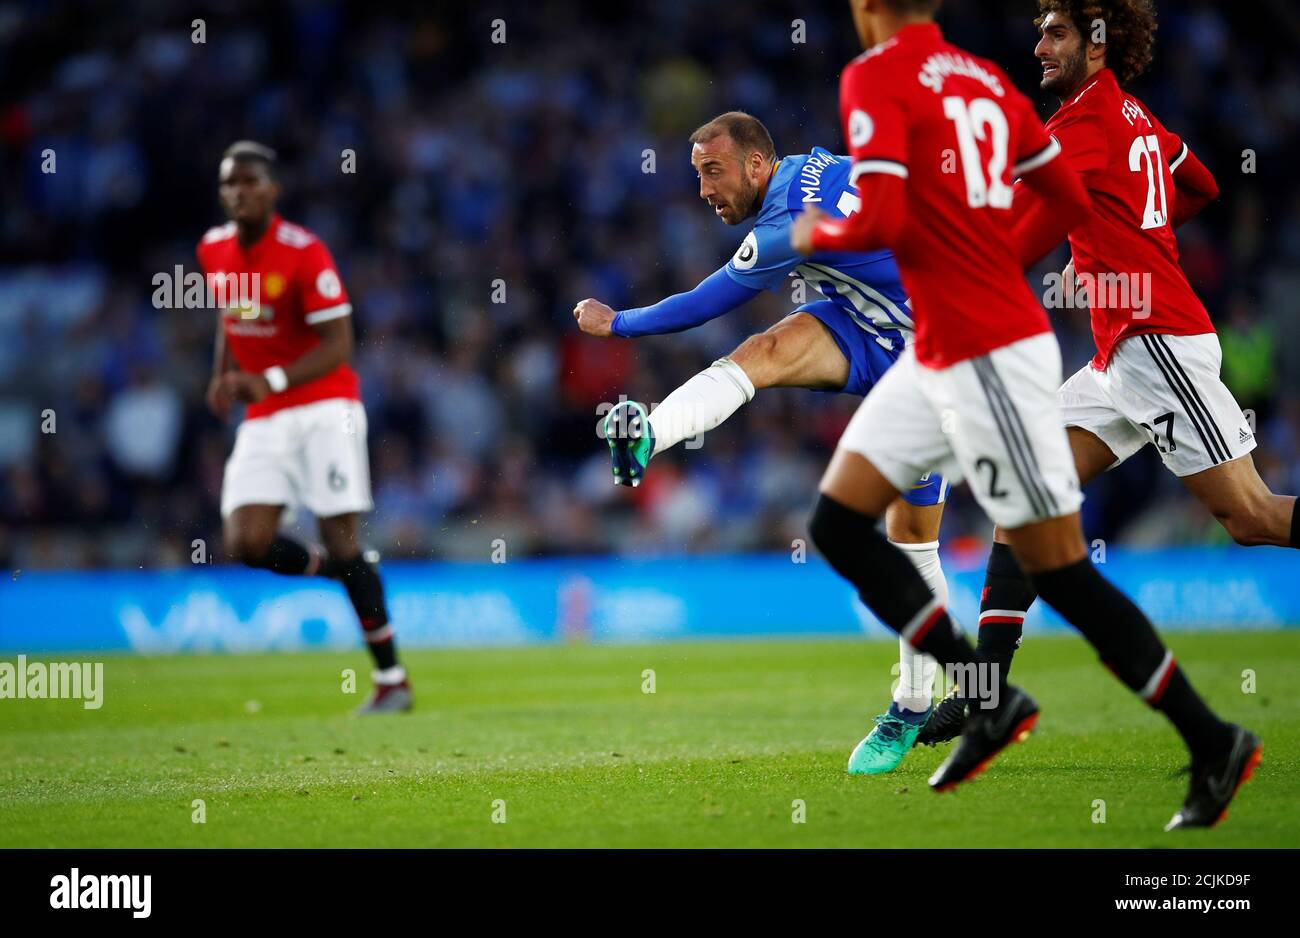 Soccer Football - Premier League - Brighton & Hove Albion v Manchester United - The American Express Community Stadium, Brighton, Britain - May 4, 2018   Brighton's Glenn Murray shoots at goal    REUTERS/Eddie Keogh    EDITORIAL USE ONLY. No use with unauthorized audio, video, data, fixture lists, club/league logos or 'live' services. Online in-match use limited to 75 images, no video emulation. No use in betting, games or single club/league/player publications.  Please contact your account representative for further details. Stock Photo